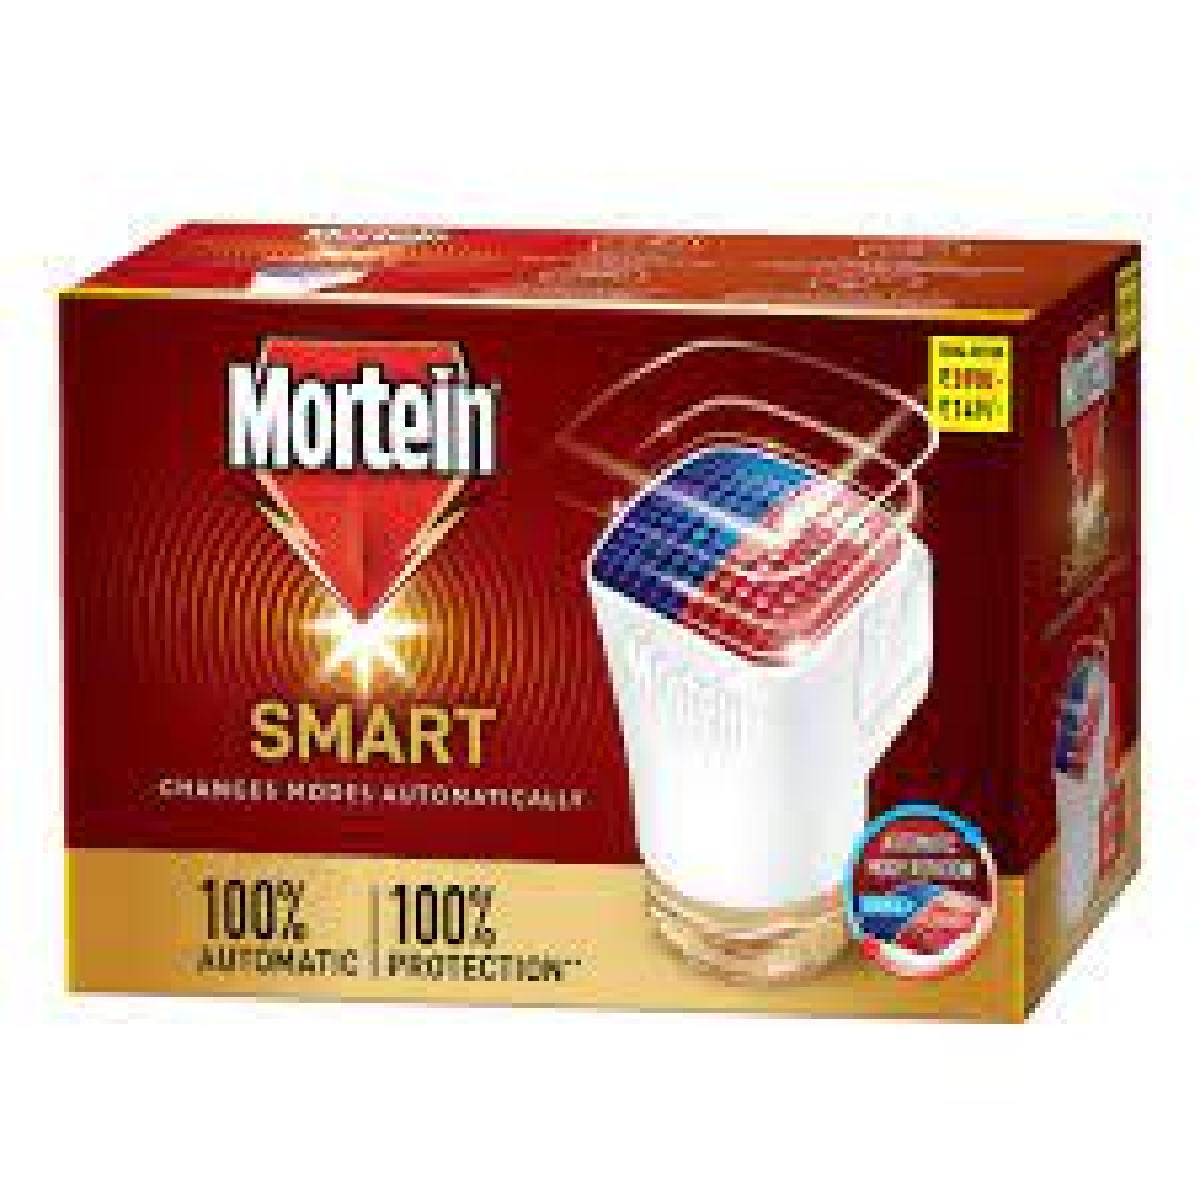 Mortein Launches Scientifically Proven Mortein Smart+ for Powerful Protection